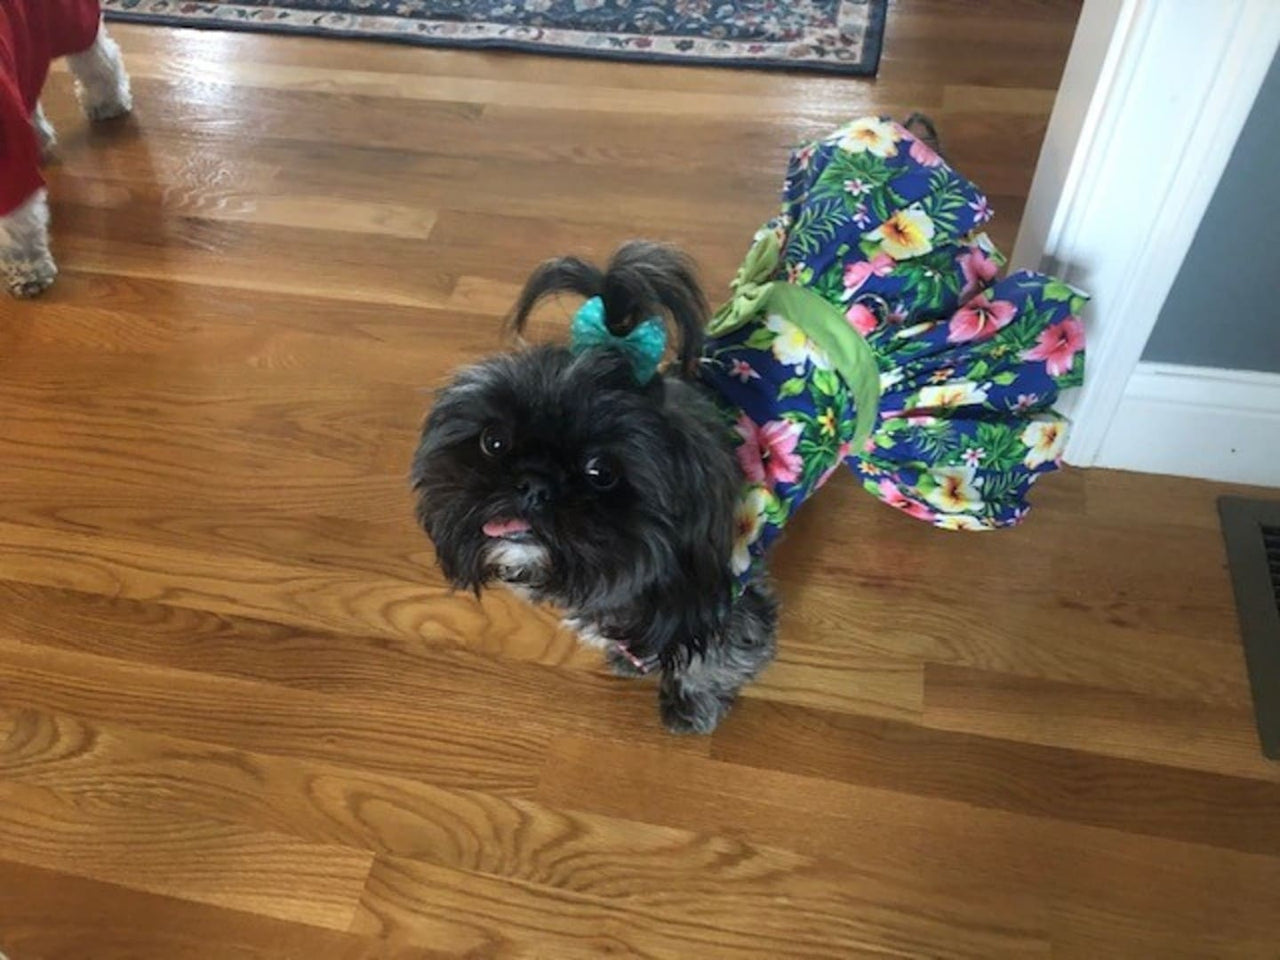 Blue Hibiscus Dog Dress with Matching Leash